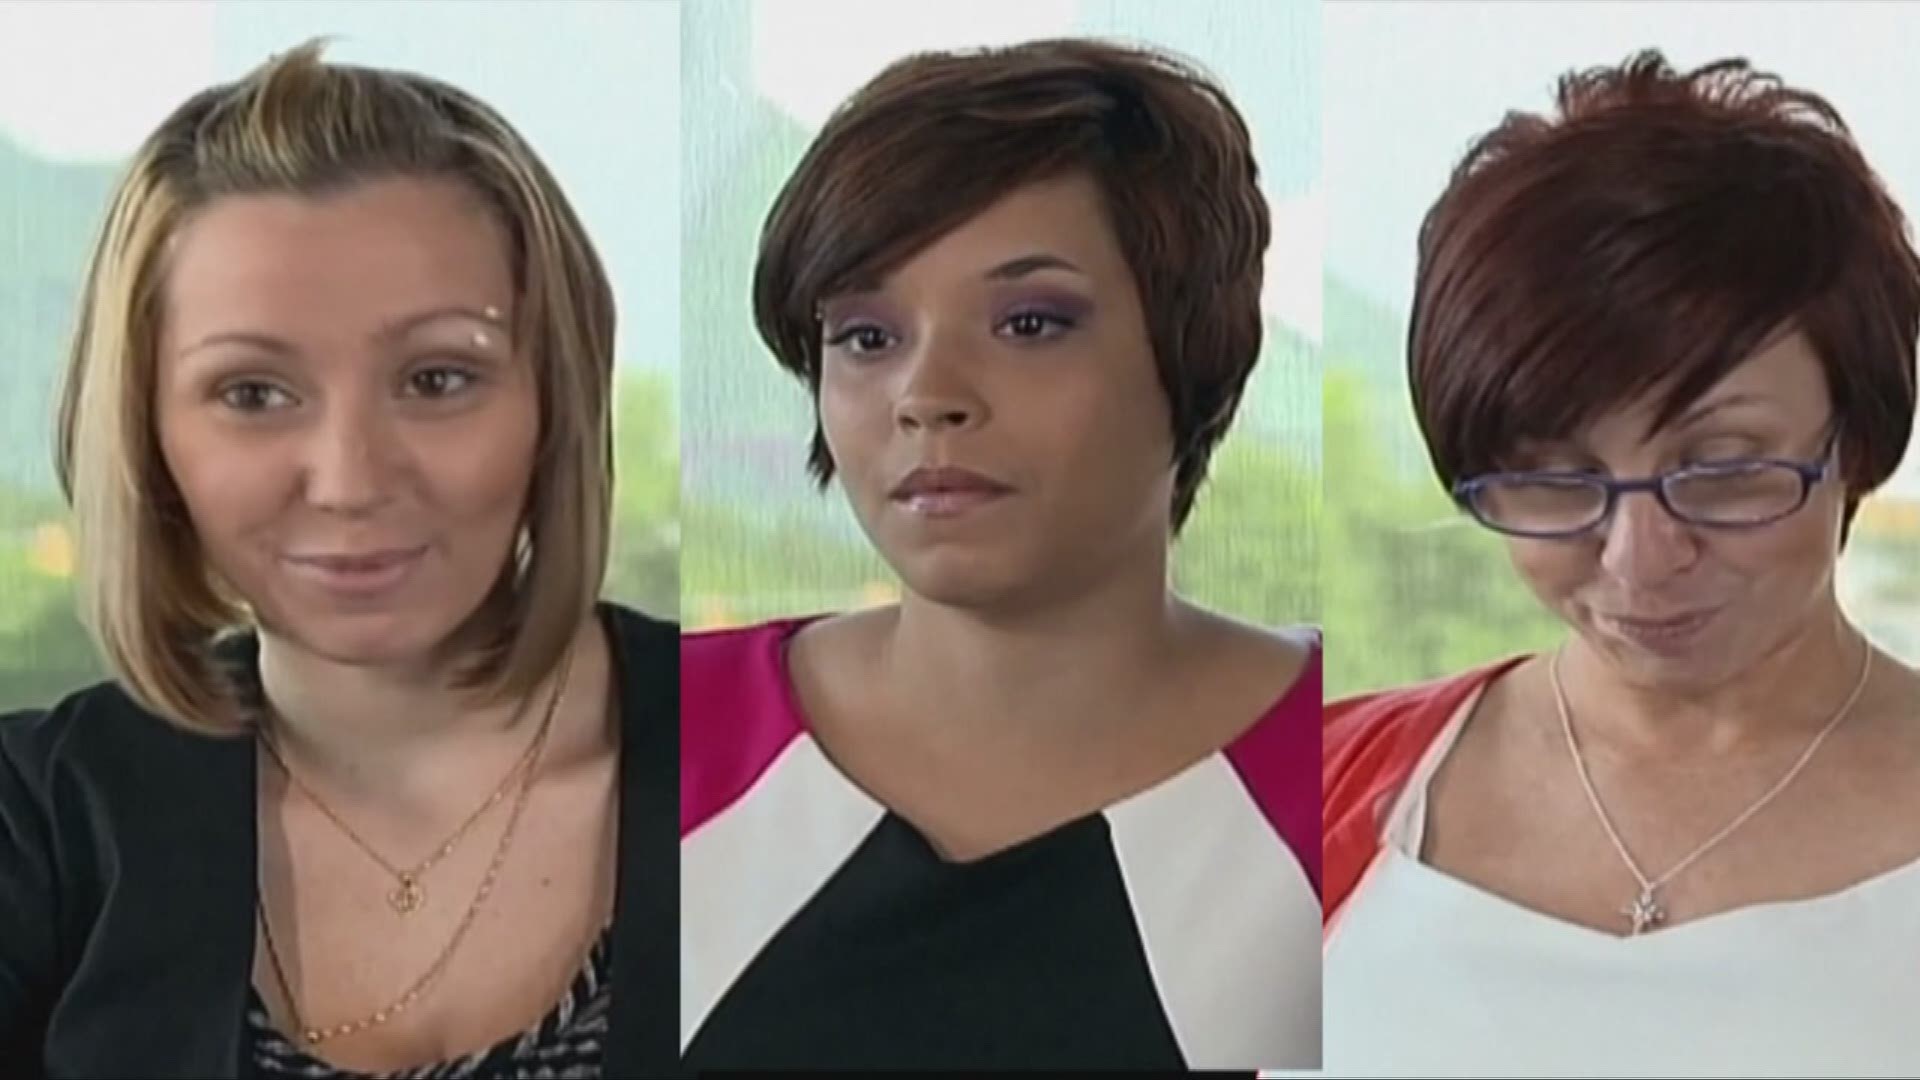 May 2018: It has been five years since Amanda Berry, Gina DeJesus and Michelle Knight escaped years of captivity inside a home on Seymour Avenue.